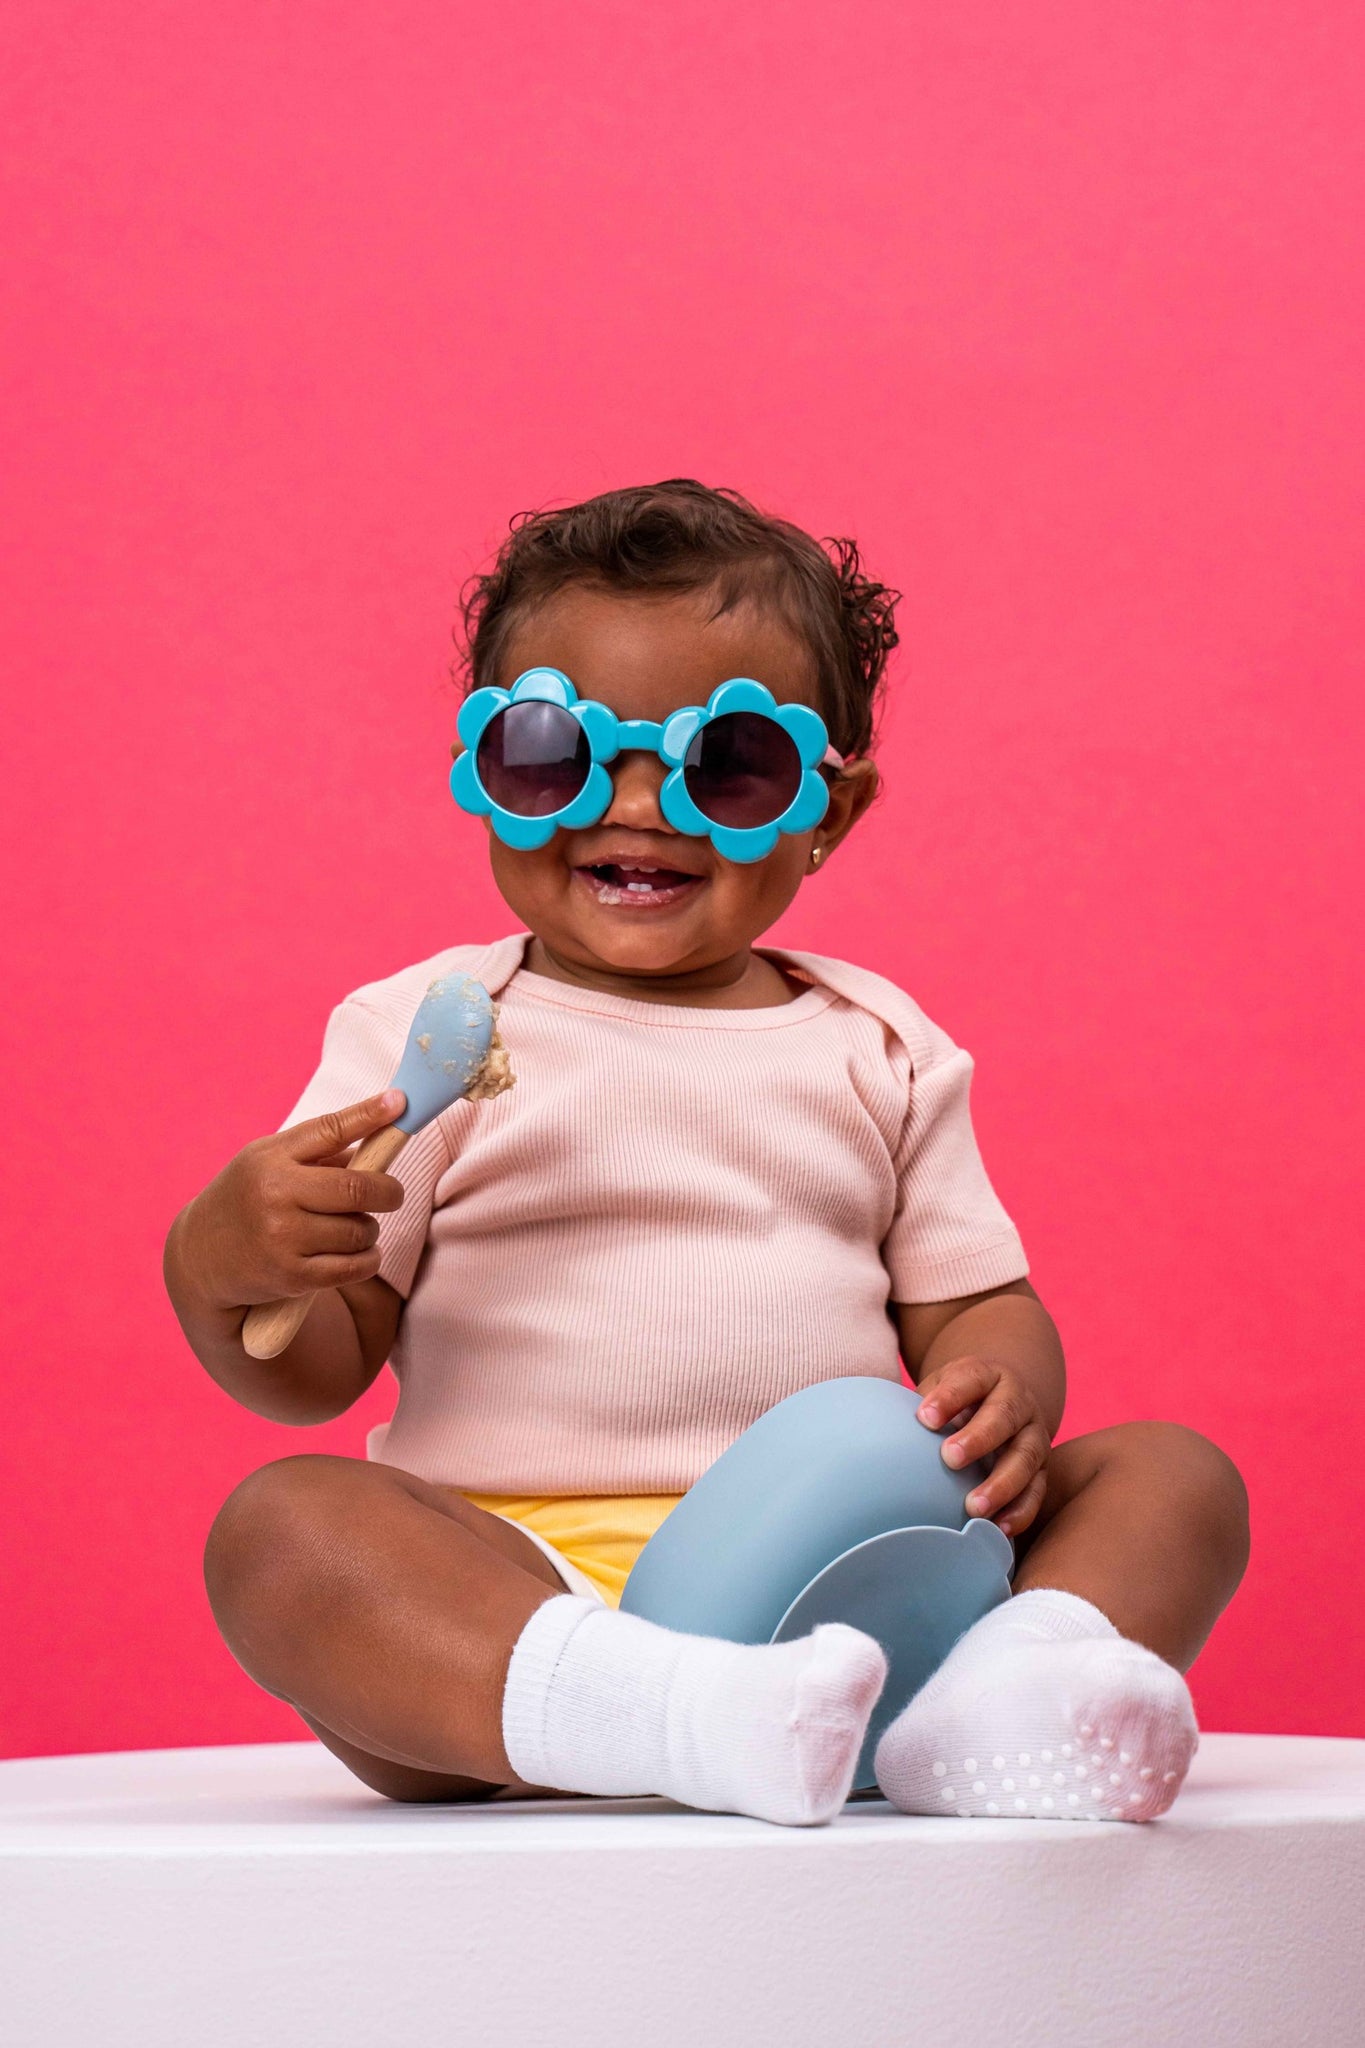 8-month-old baby with spoon